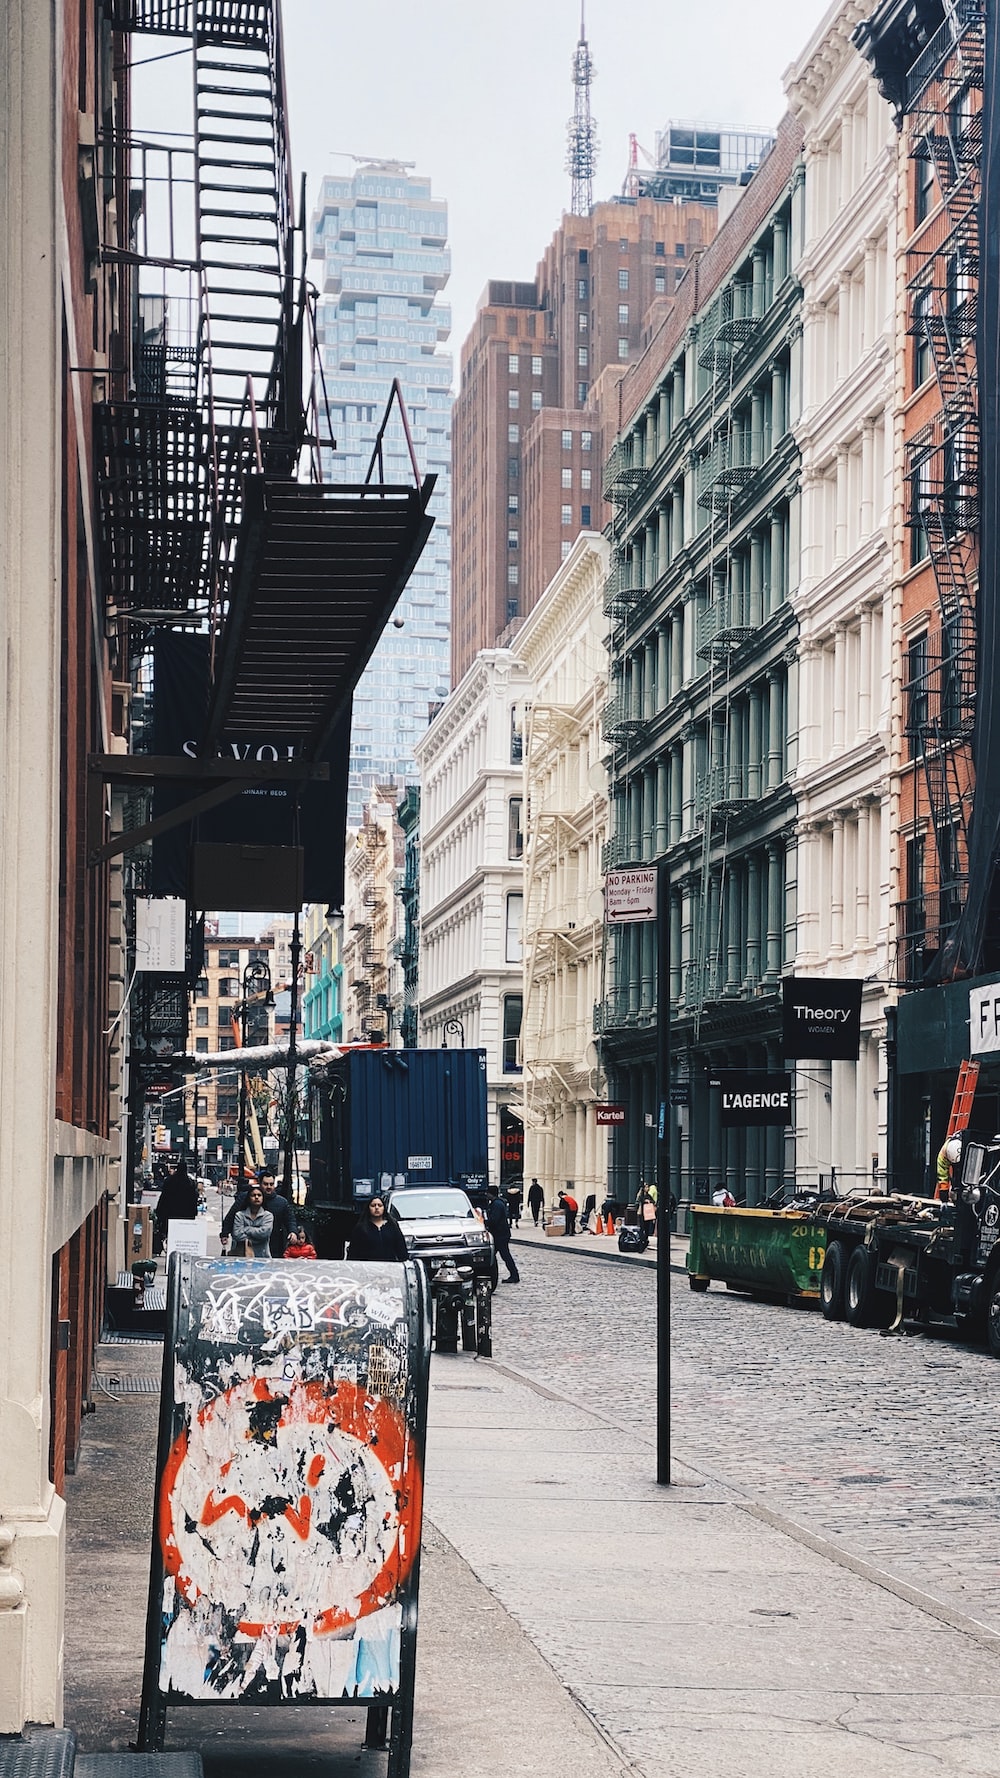 Soho new york pictures download free images on